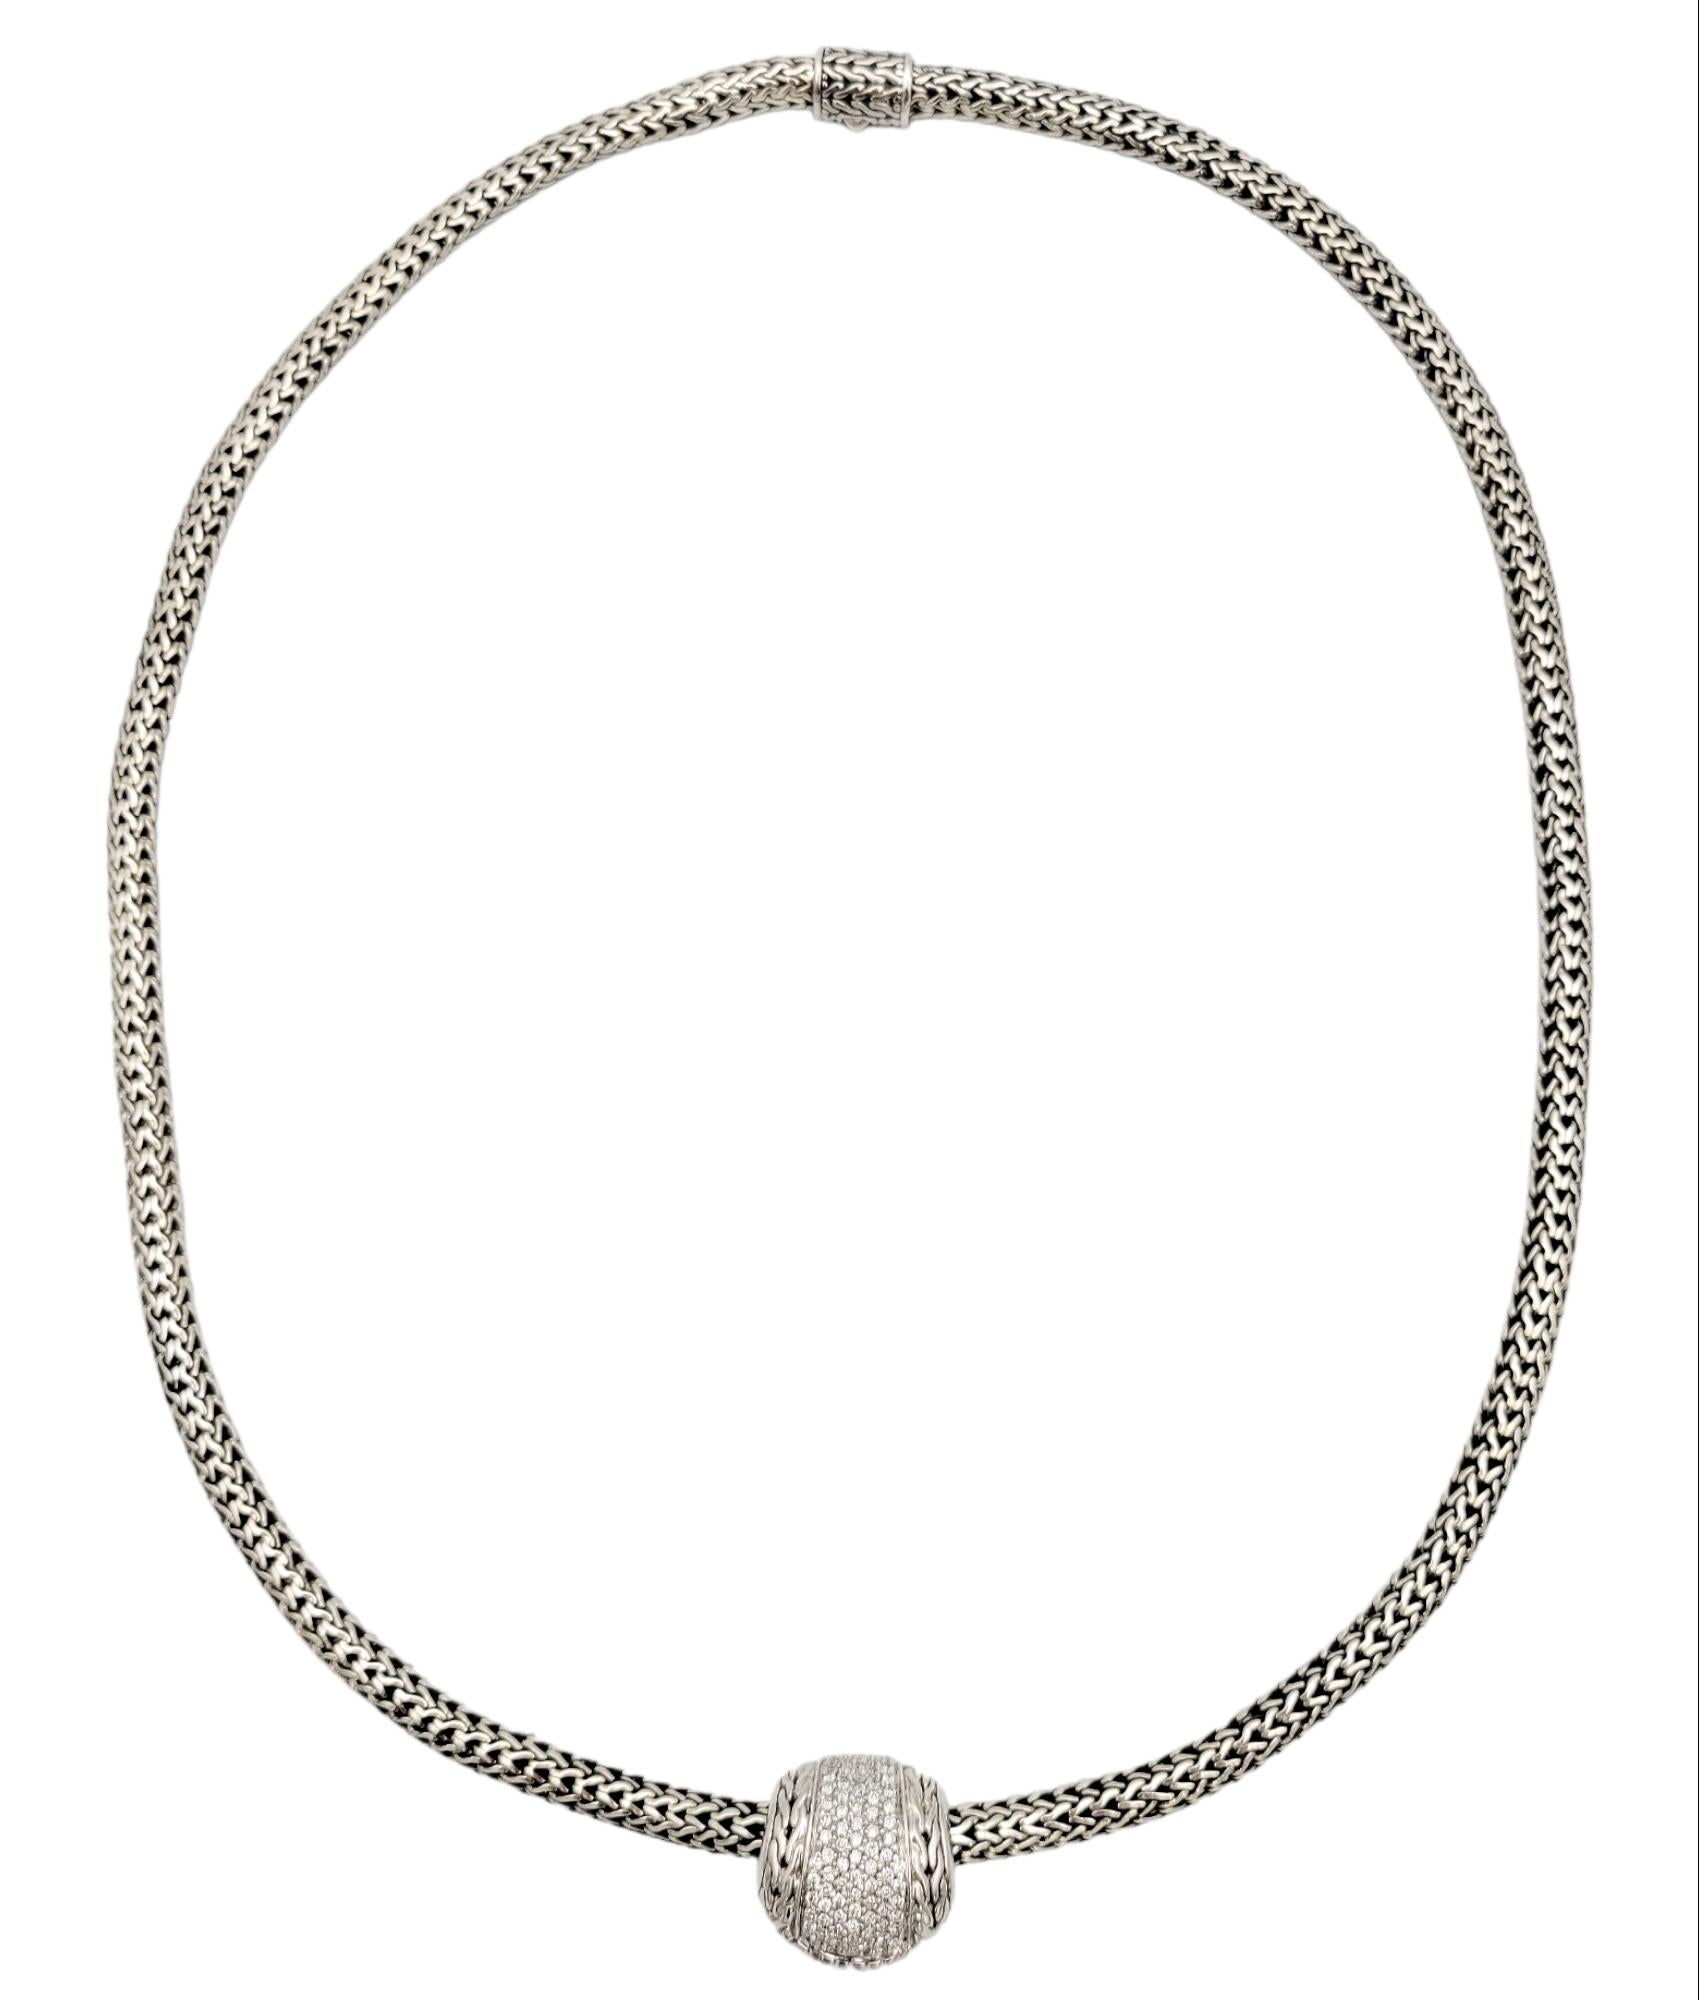 This incredible diamond pave pendant & classic chain was designed by John Hardy. Inspired by Bali and its time-honored jewelry-making traditions, John Hardy was founded in 1975 with a dedication to sustainable handcrafted jewelry. This elegant piece